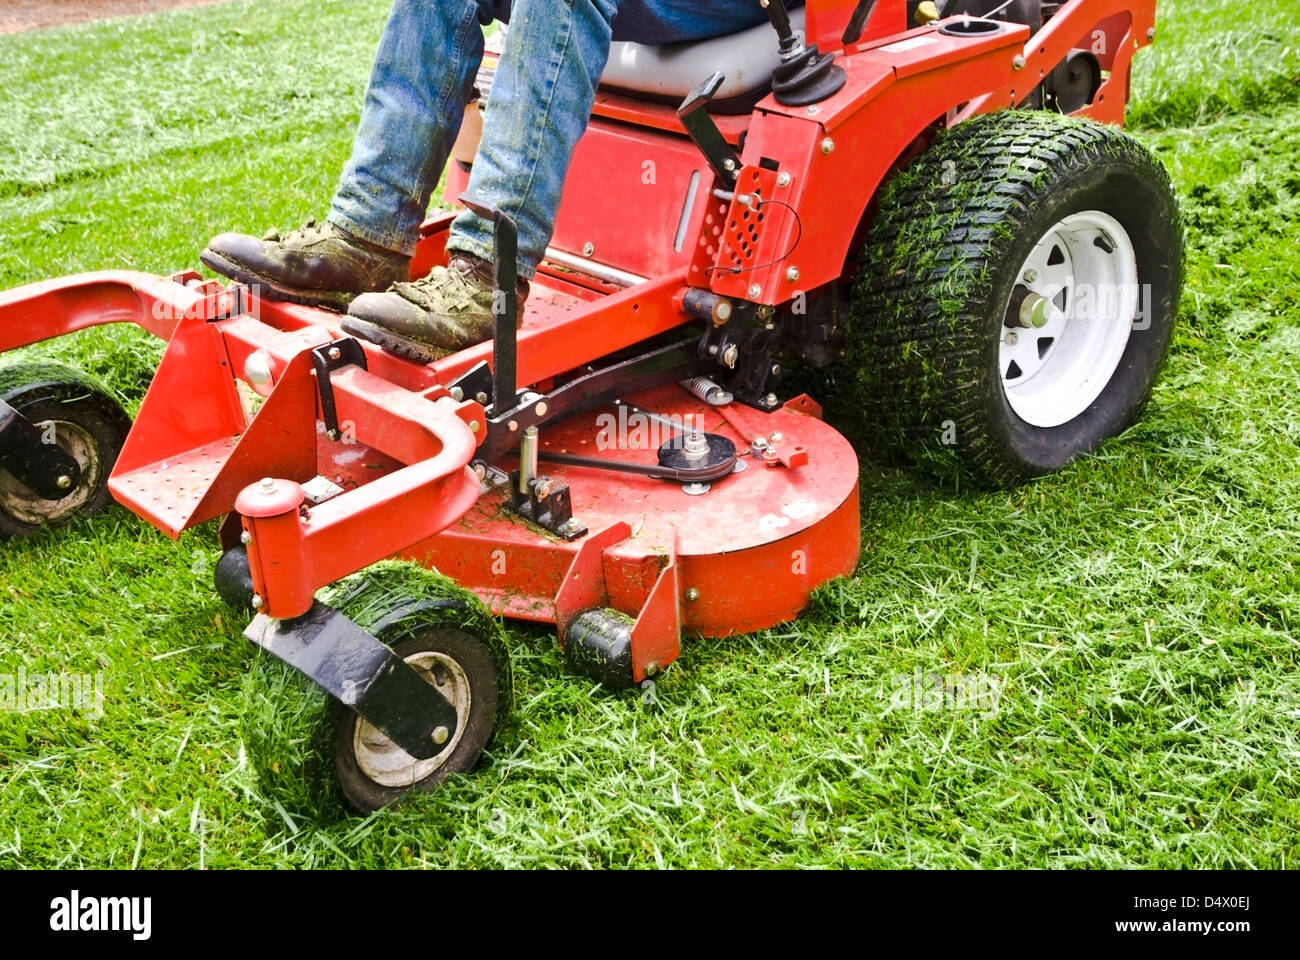 Man on a riding lawn mower that has grass stuck to the wheels. Spring and summer outdoor maintenance. Stock Photo